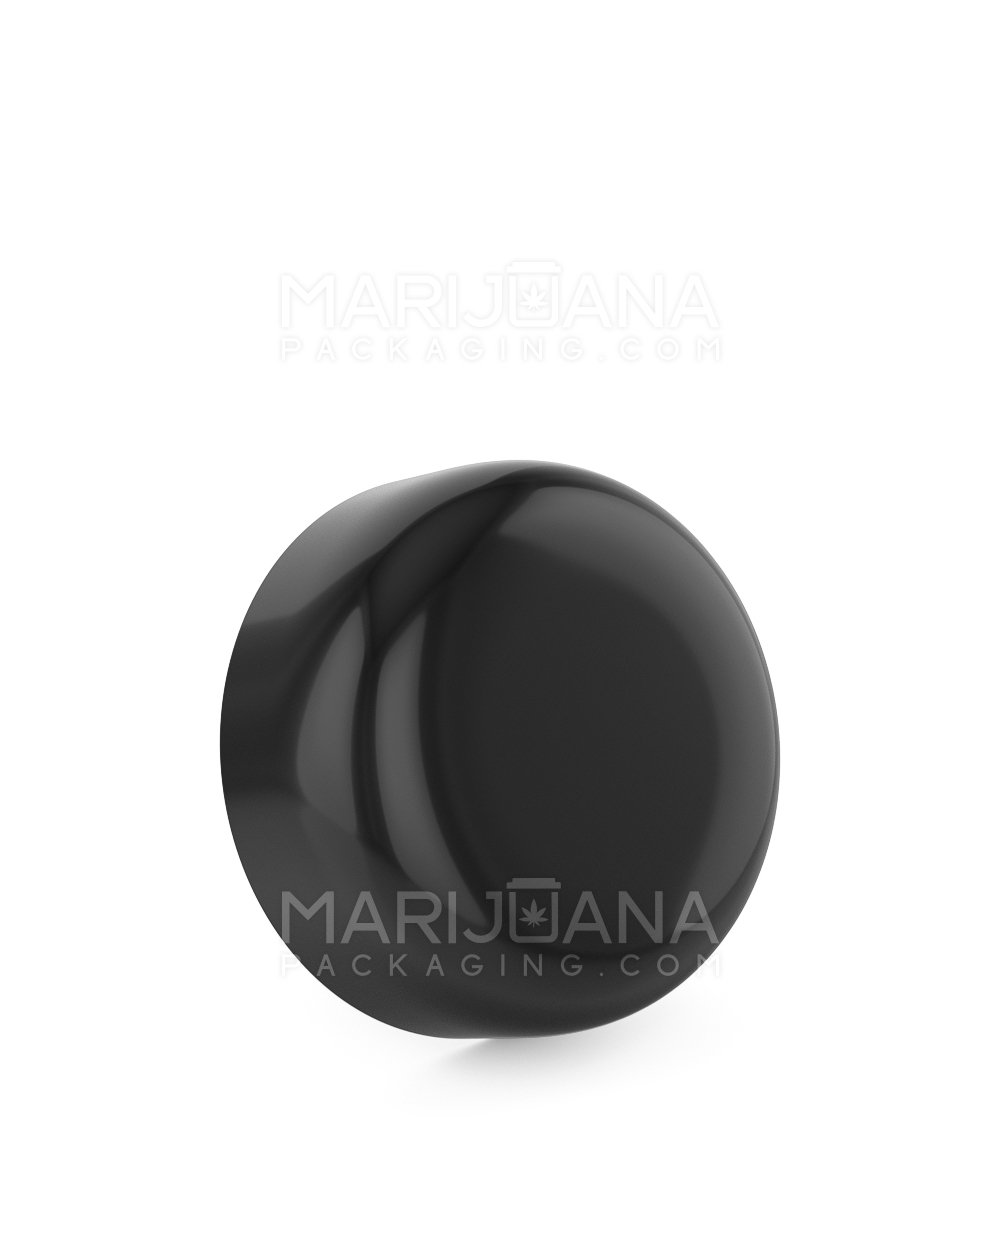 Child Resistant | Dome Push Down & Turn Plastic Caps w/ Foam Liner | 53mm - Glossy Black - 120 Count - 1